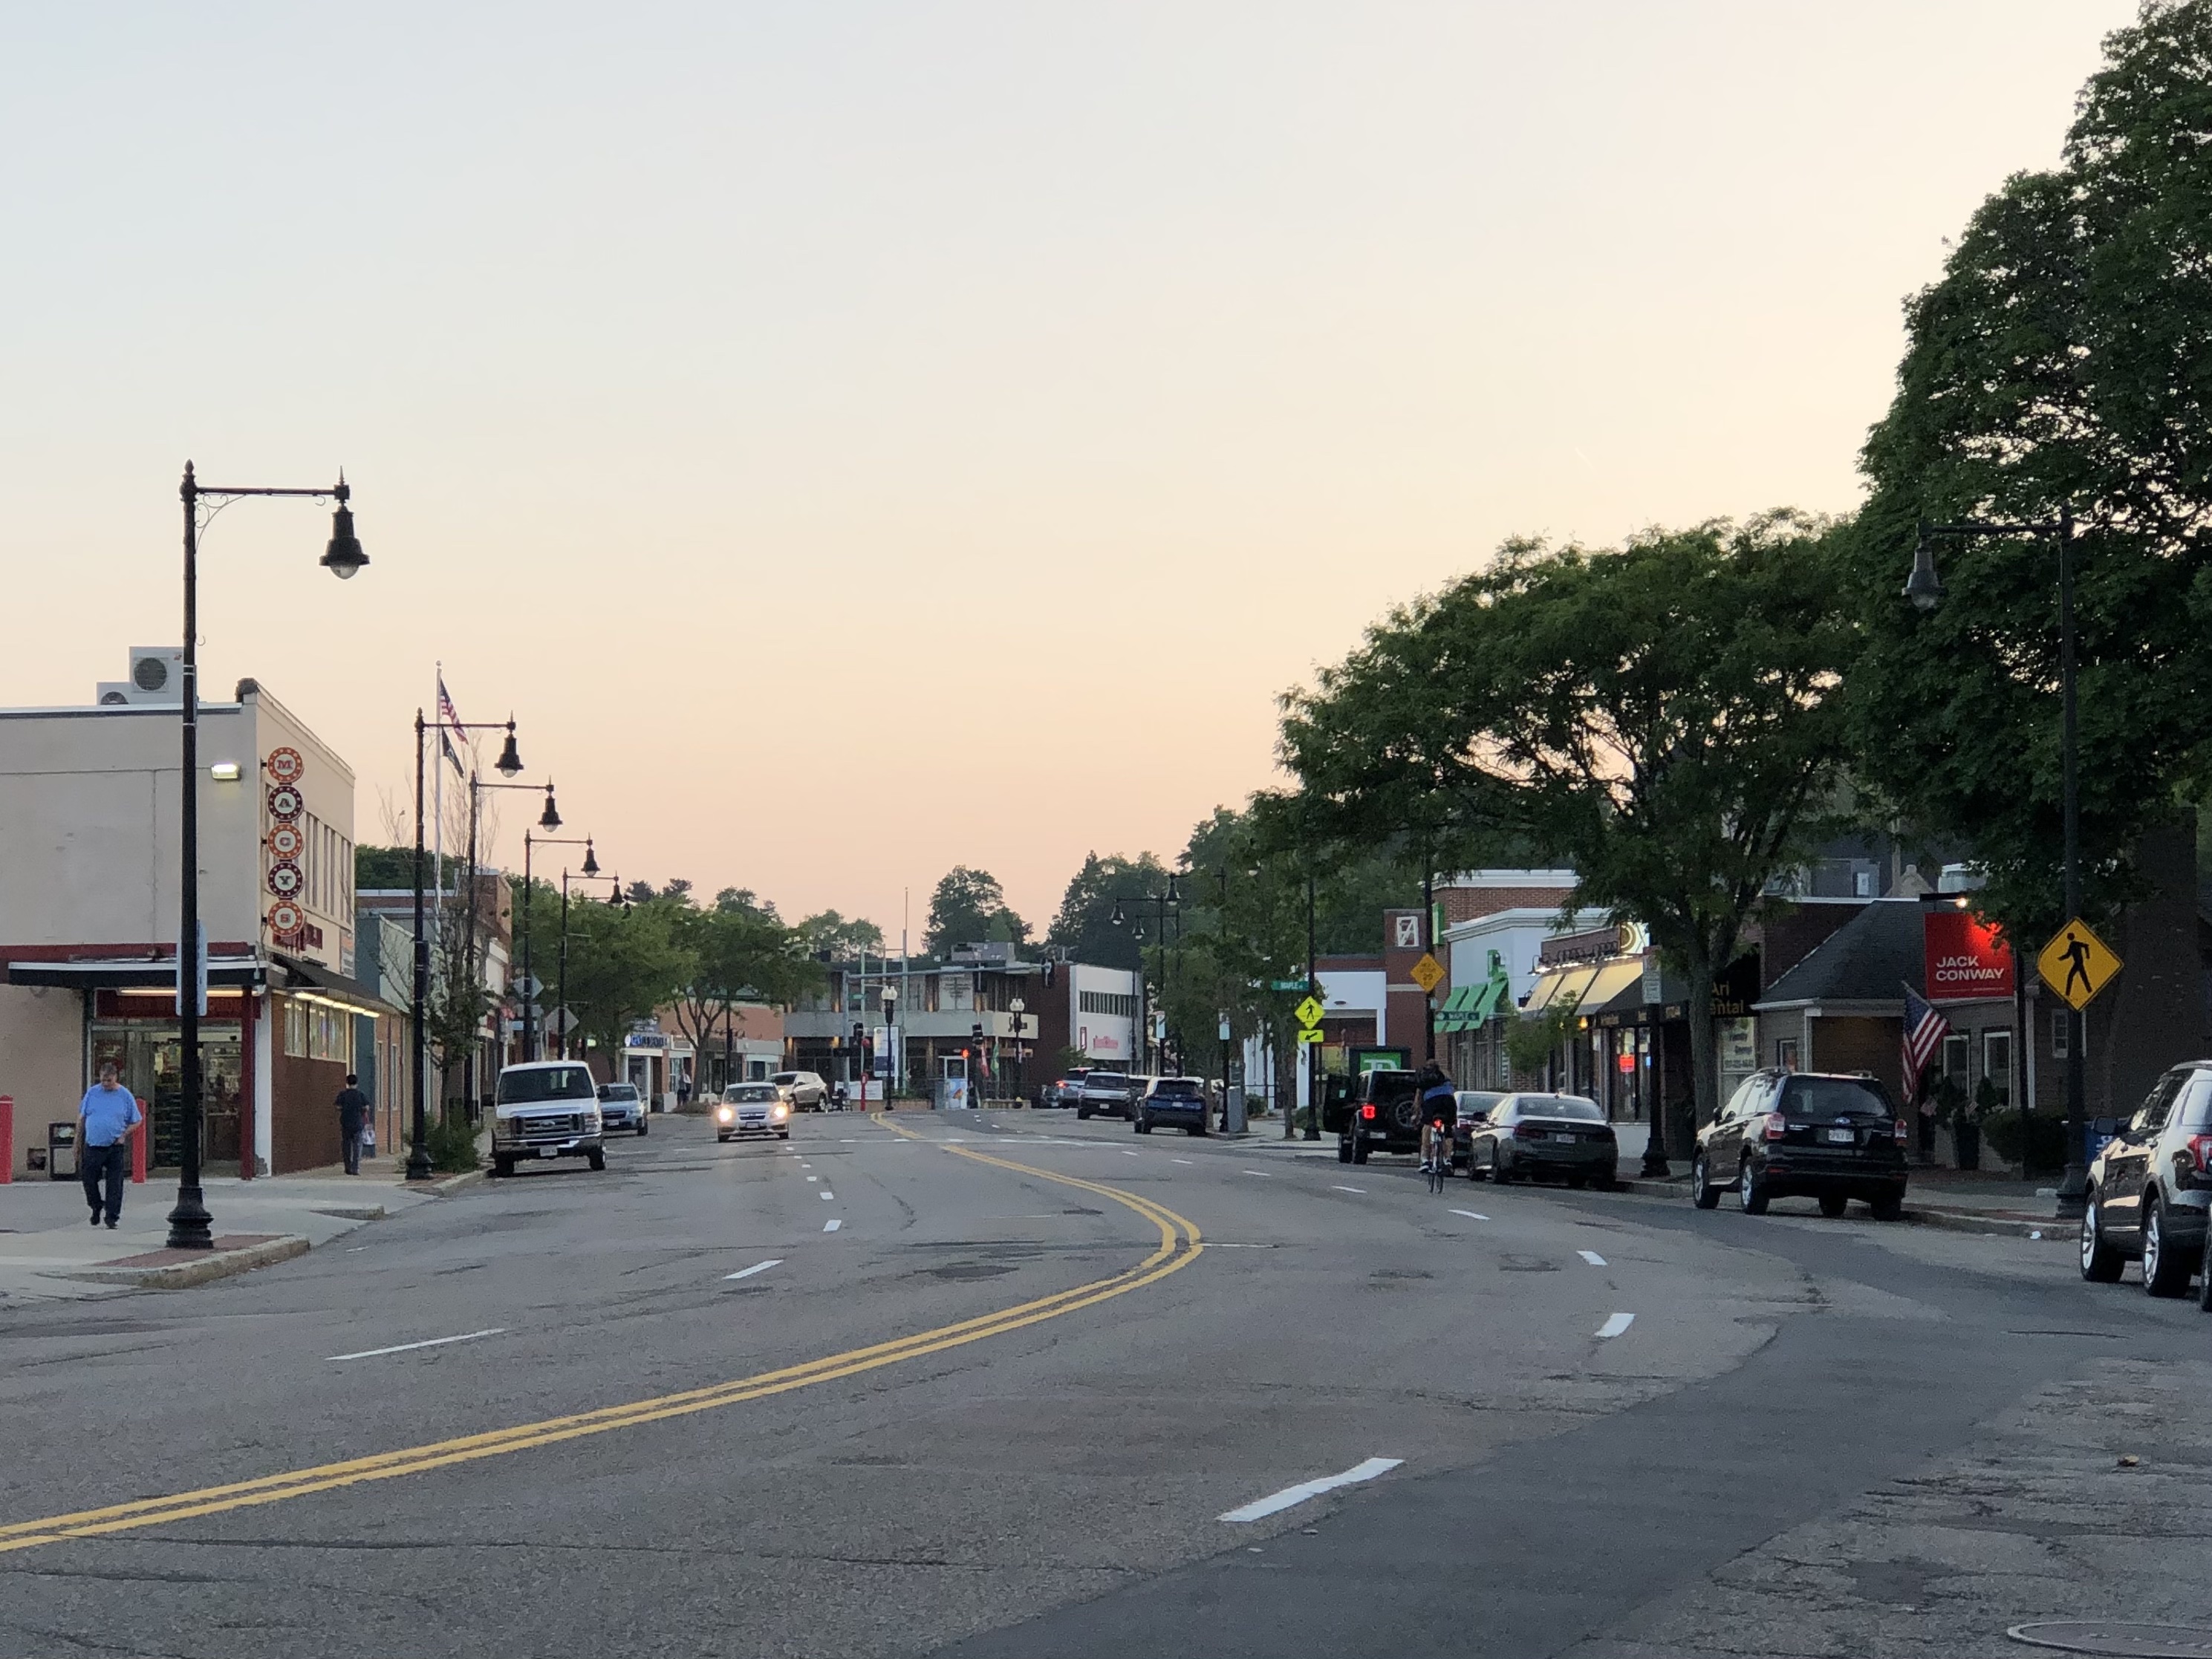 A sunset view down a mostly-empty, wide four-lane street lined with small businesses and parked cars.